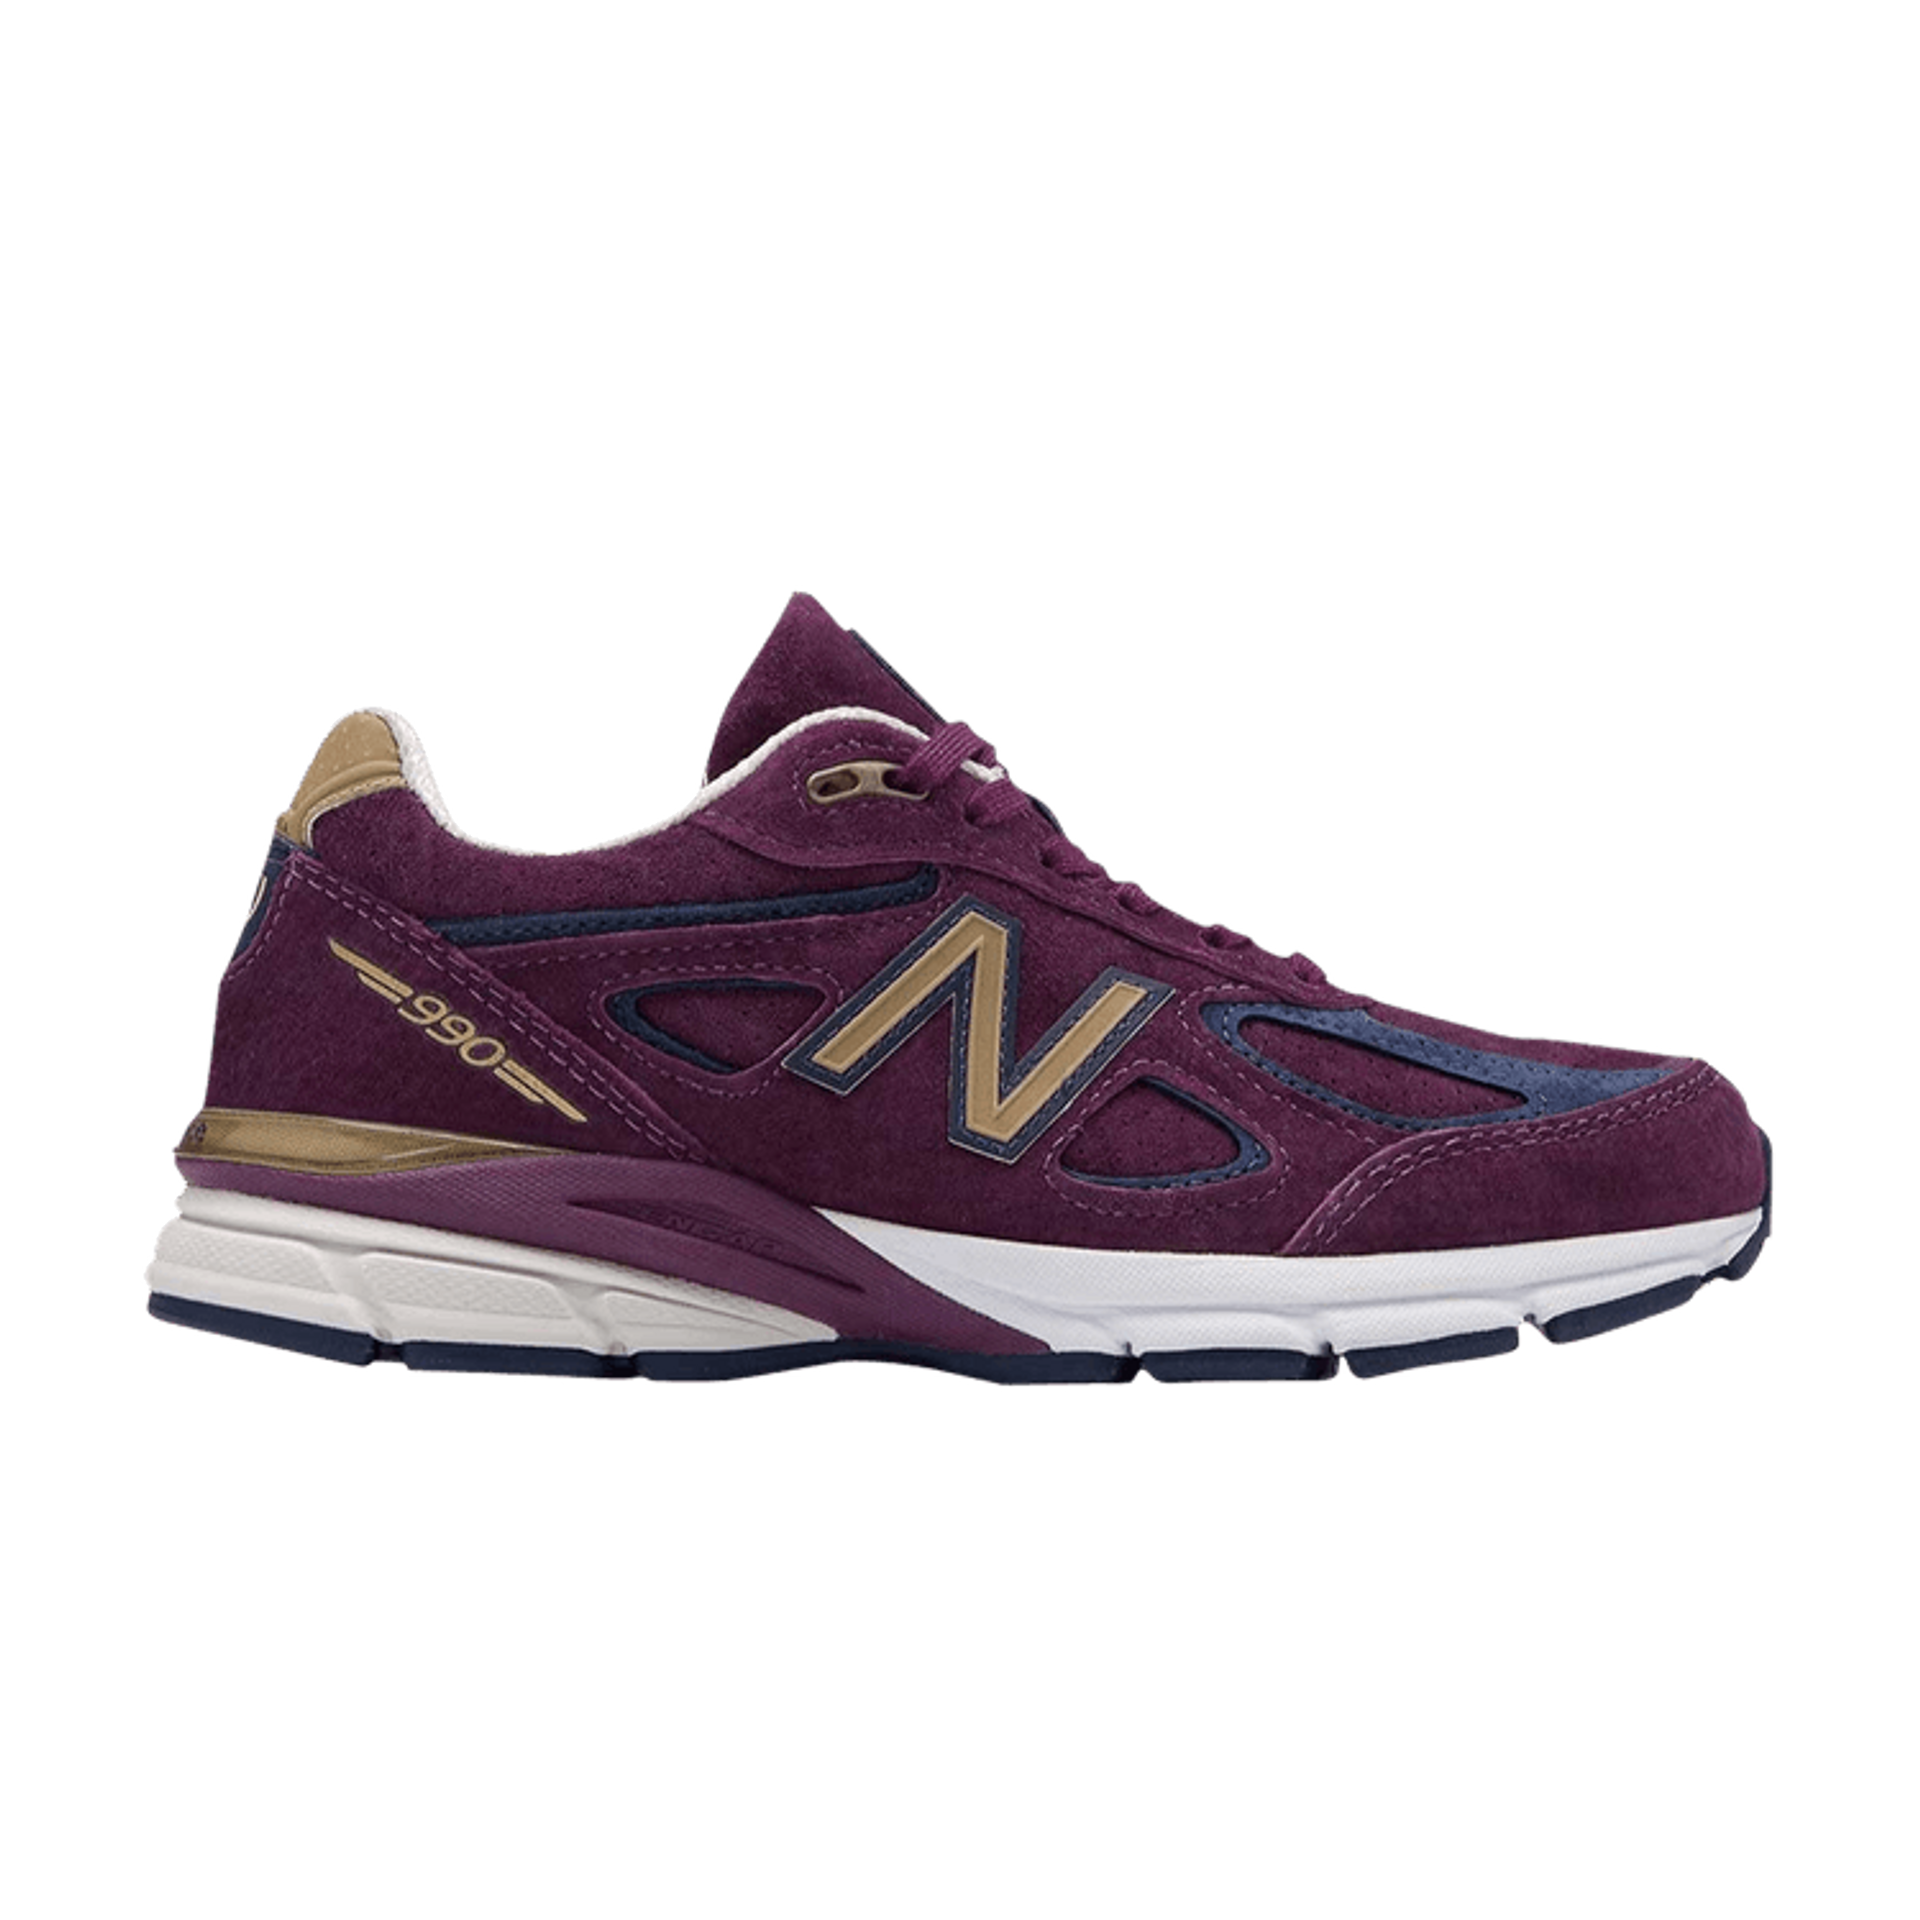 Wmns 990v4 Made in USA 'Deep Claret'